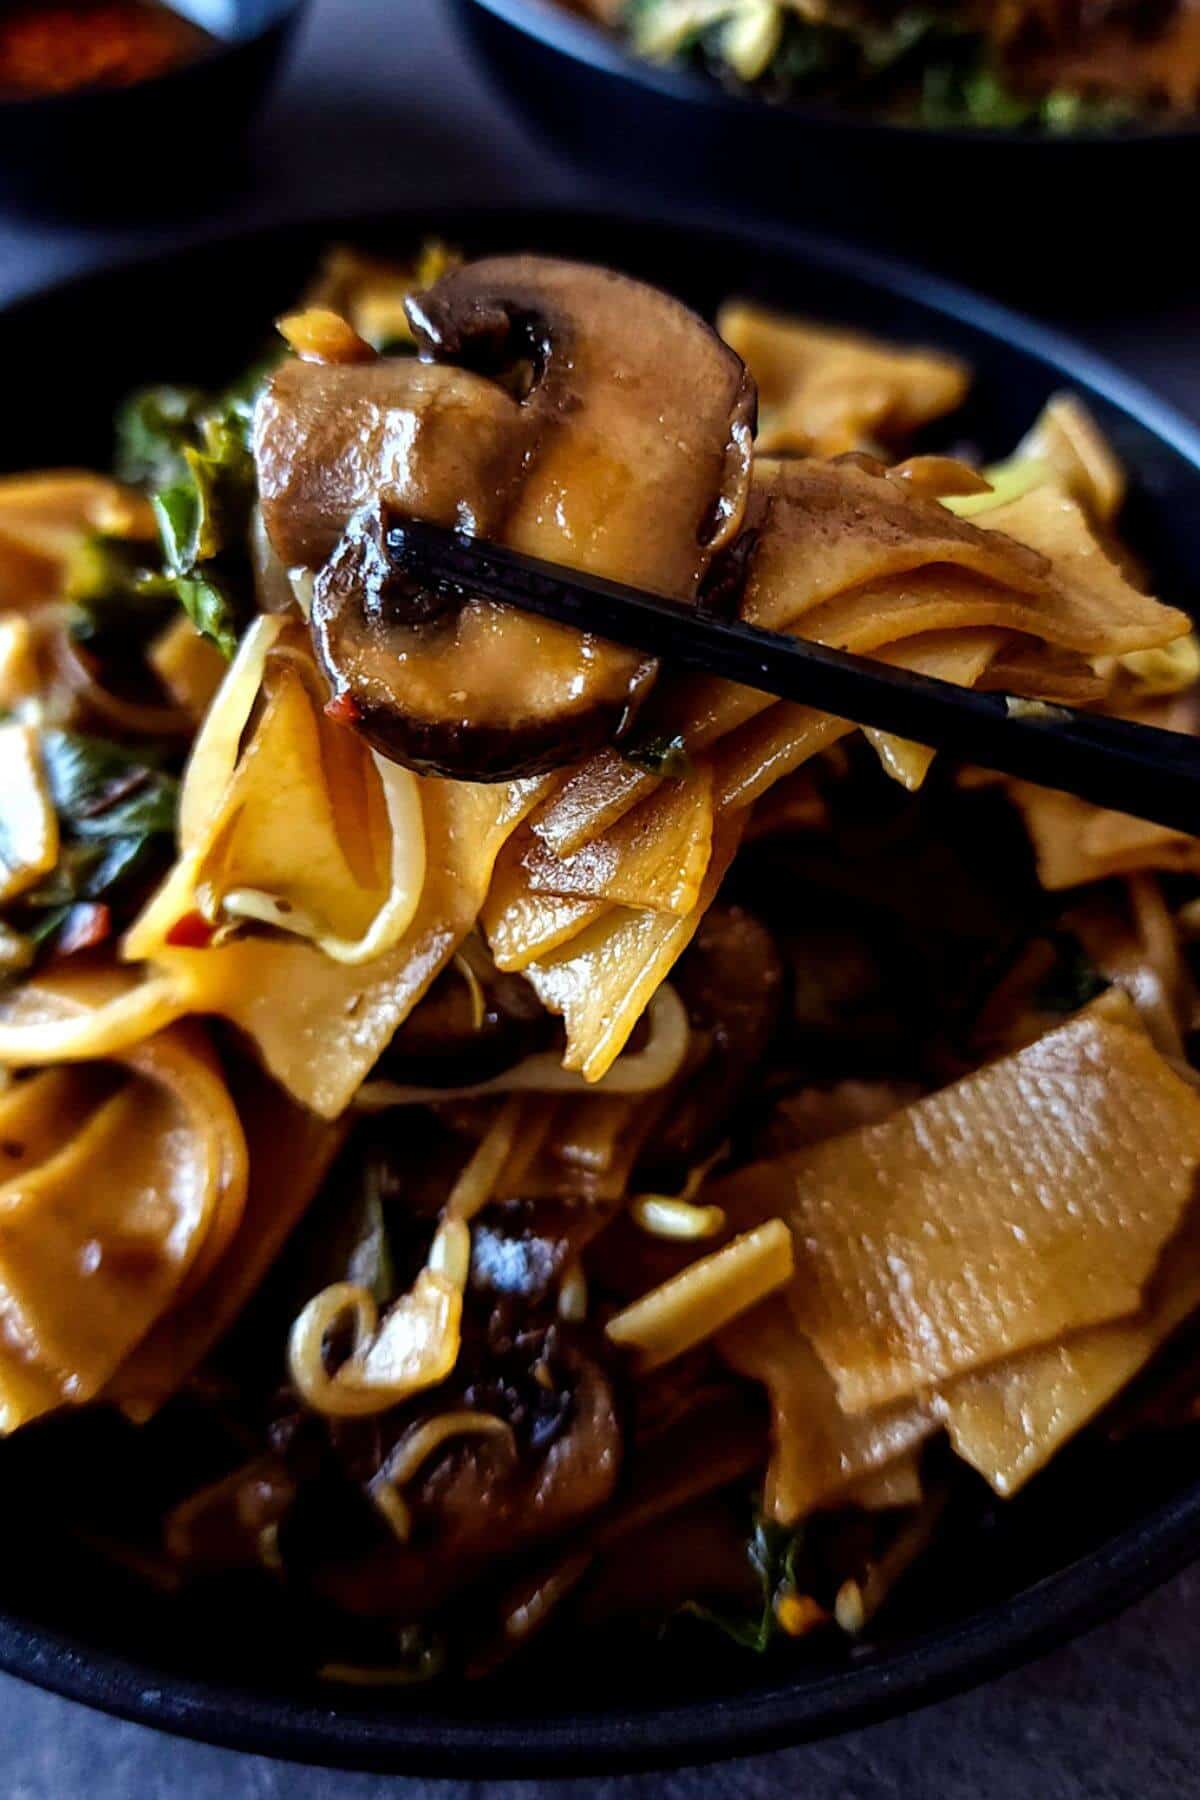 A slice of mushroom picked up with a pair of chopsticks over a bowl of ho fun noodles.